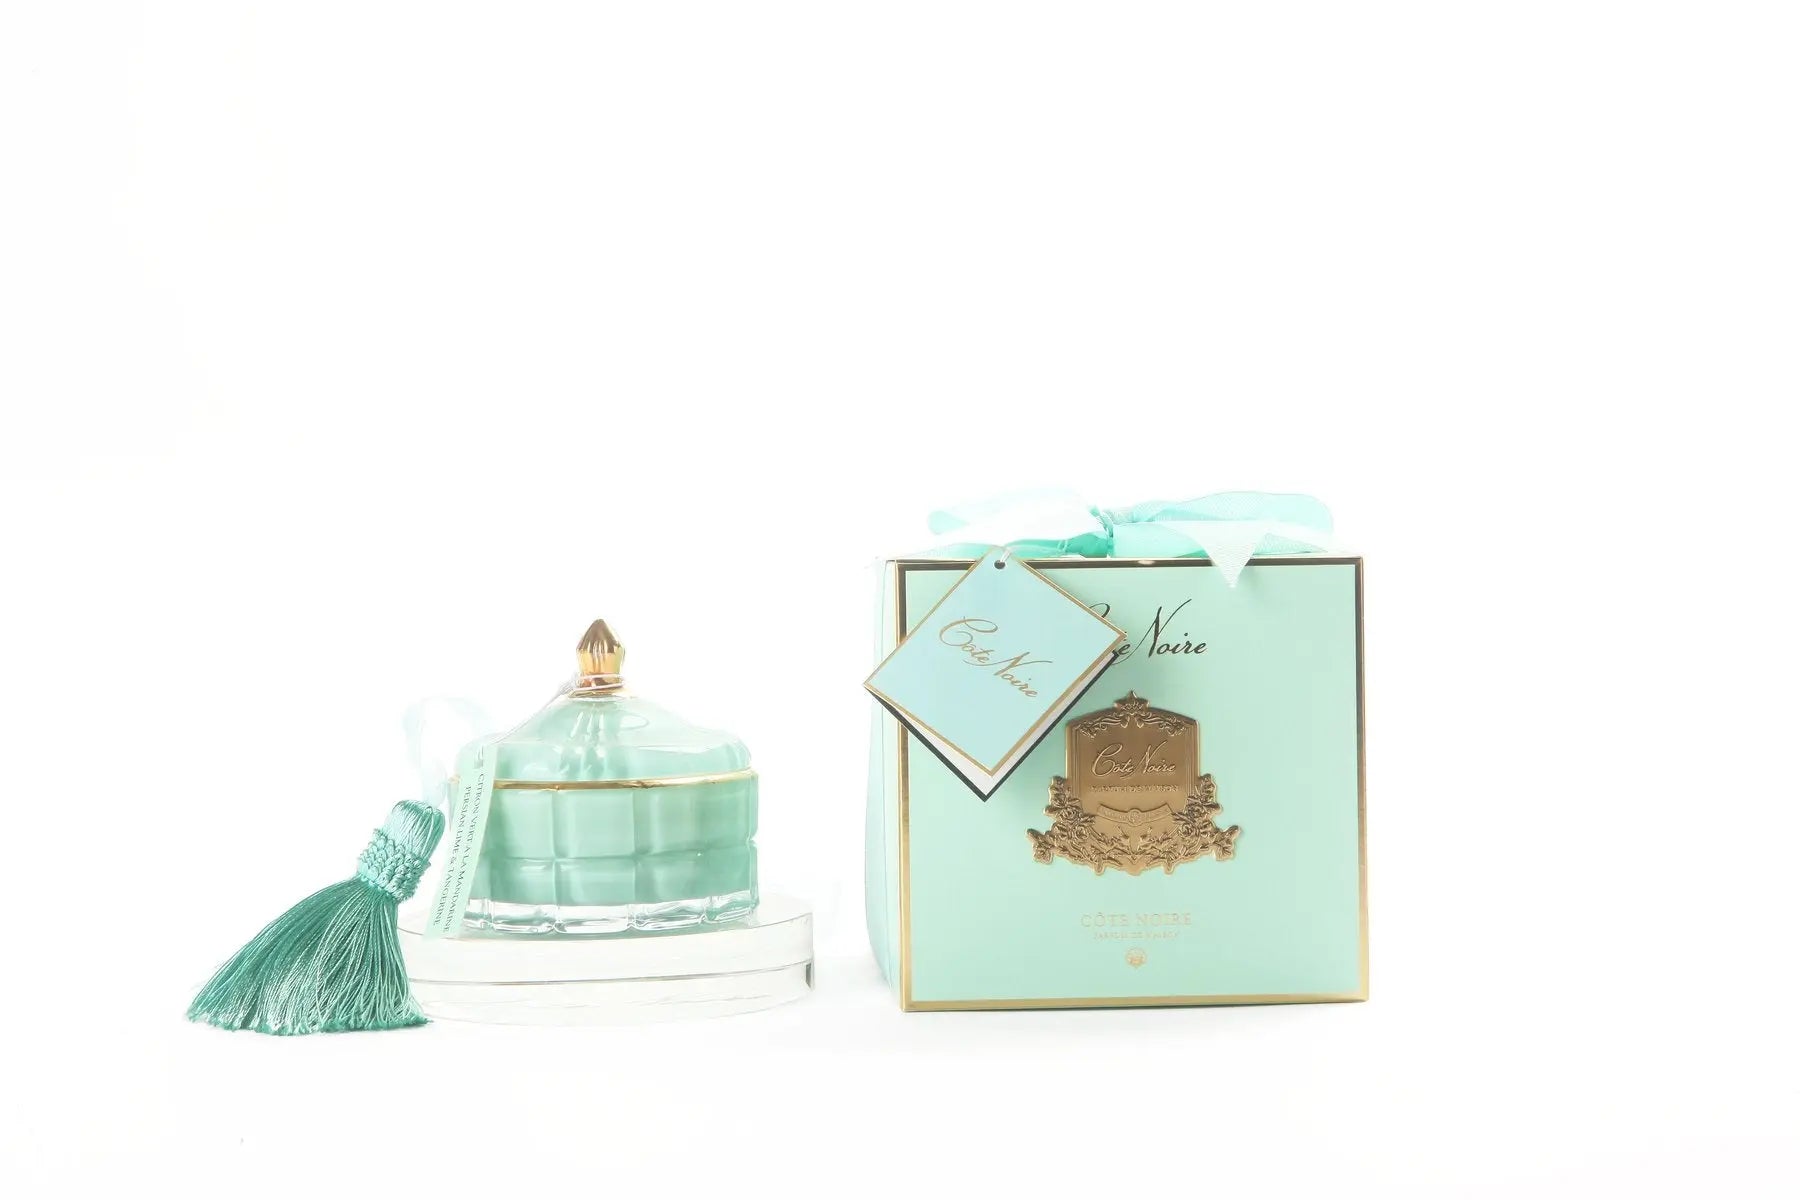 The image features a luxurious candle and gift box display. On the left, there's a decorative candle in a translucent Tiffany blue glass container adorned with a golden tassel. The lid of the candle has a golden knob on top, adding a touch of elegance. On the right, a matching Tiffany blue gift box with a golden crest and a white ribbon is shown. The box also has a gift tag attached with a light blue ribbon, inscribed with "Cote Noire."